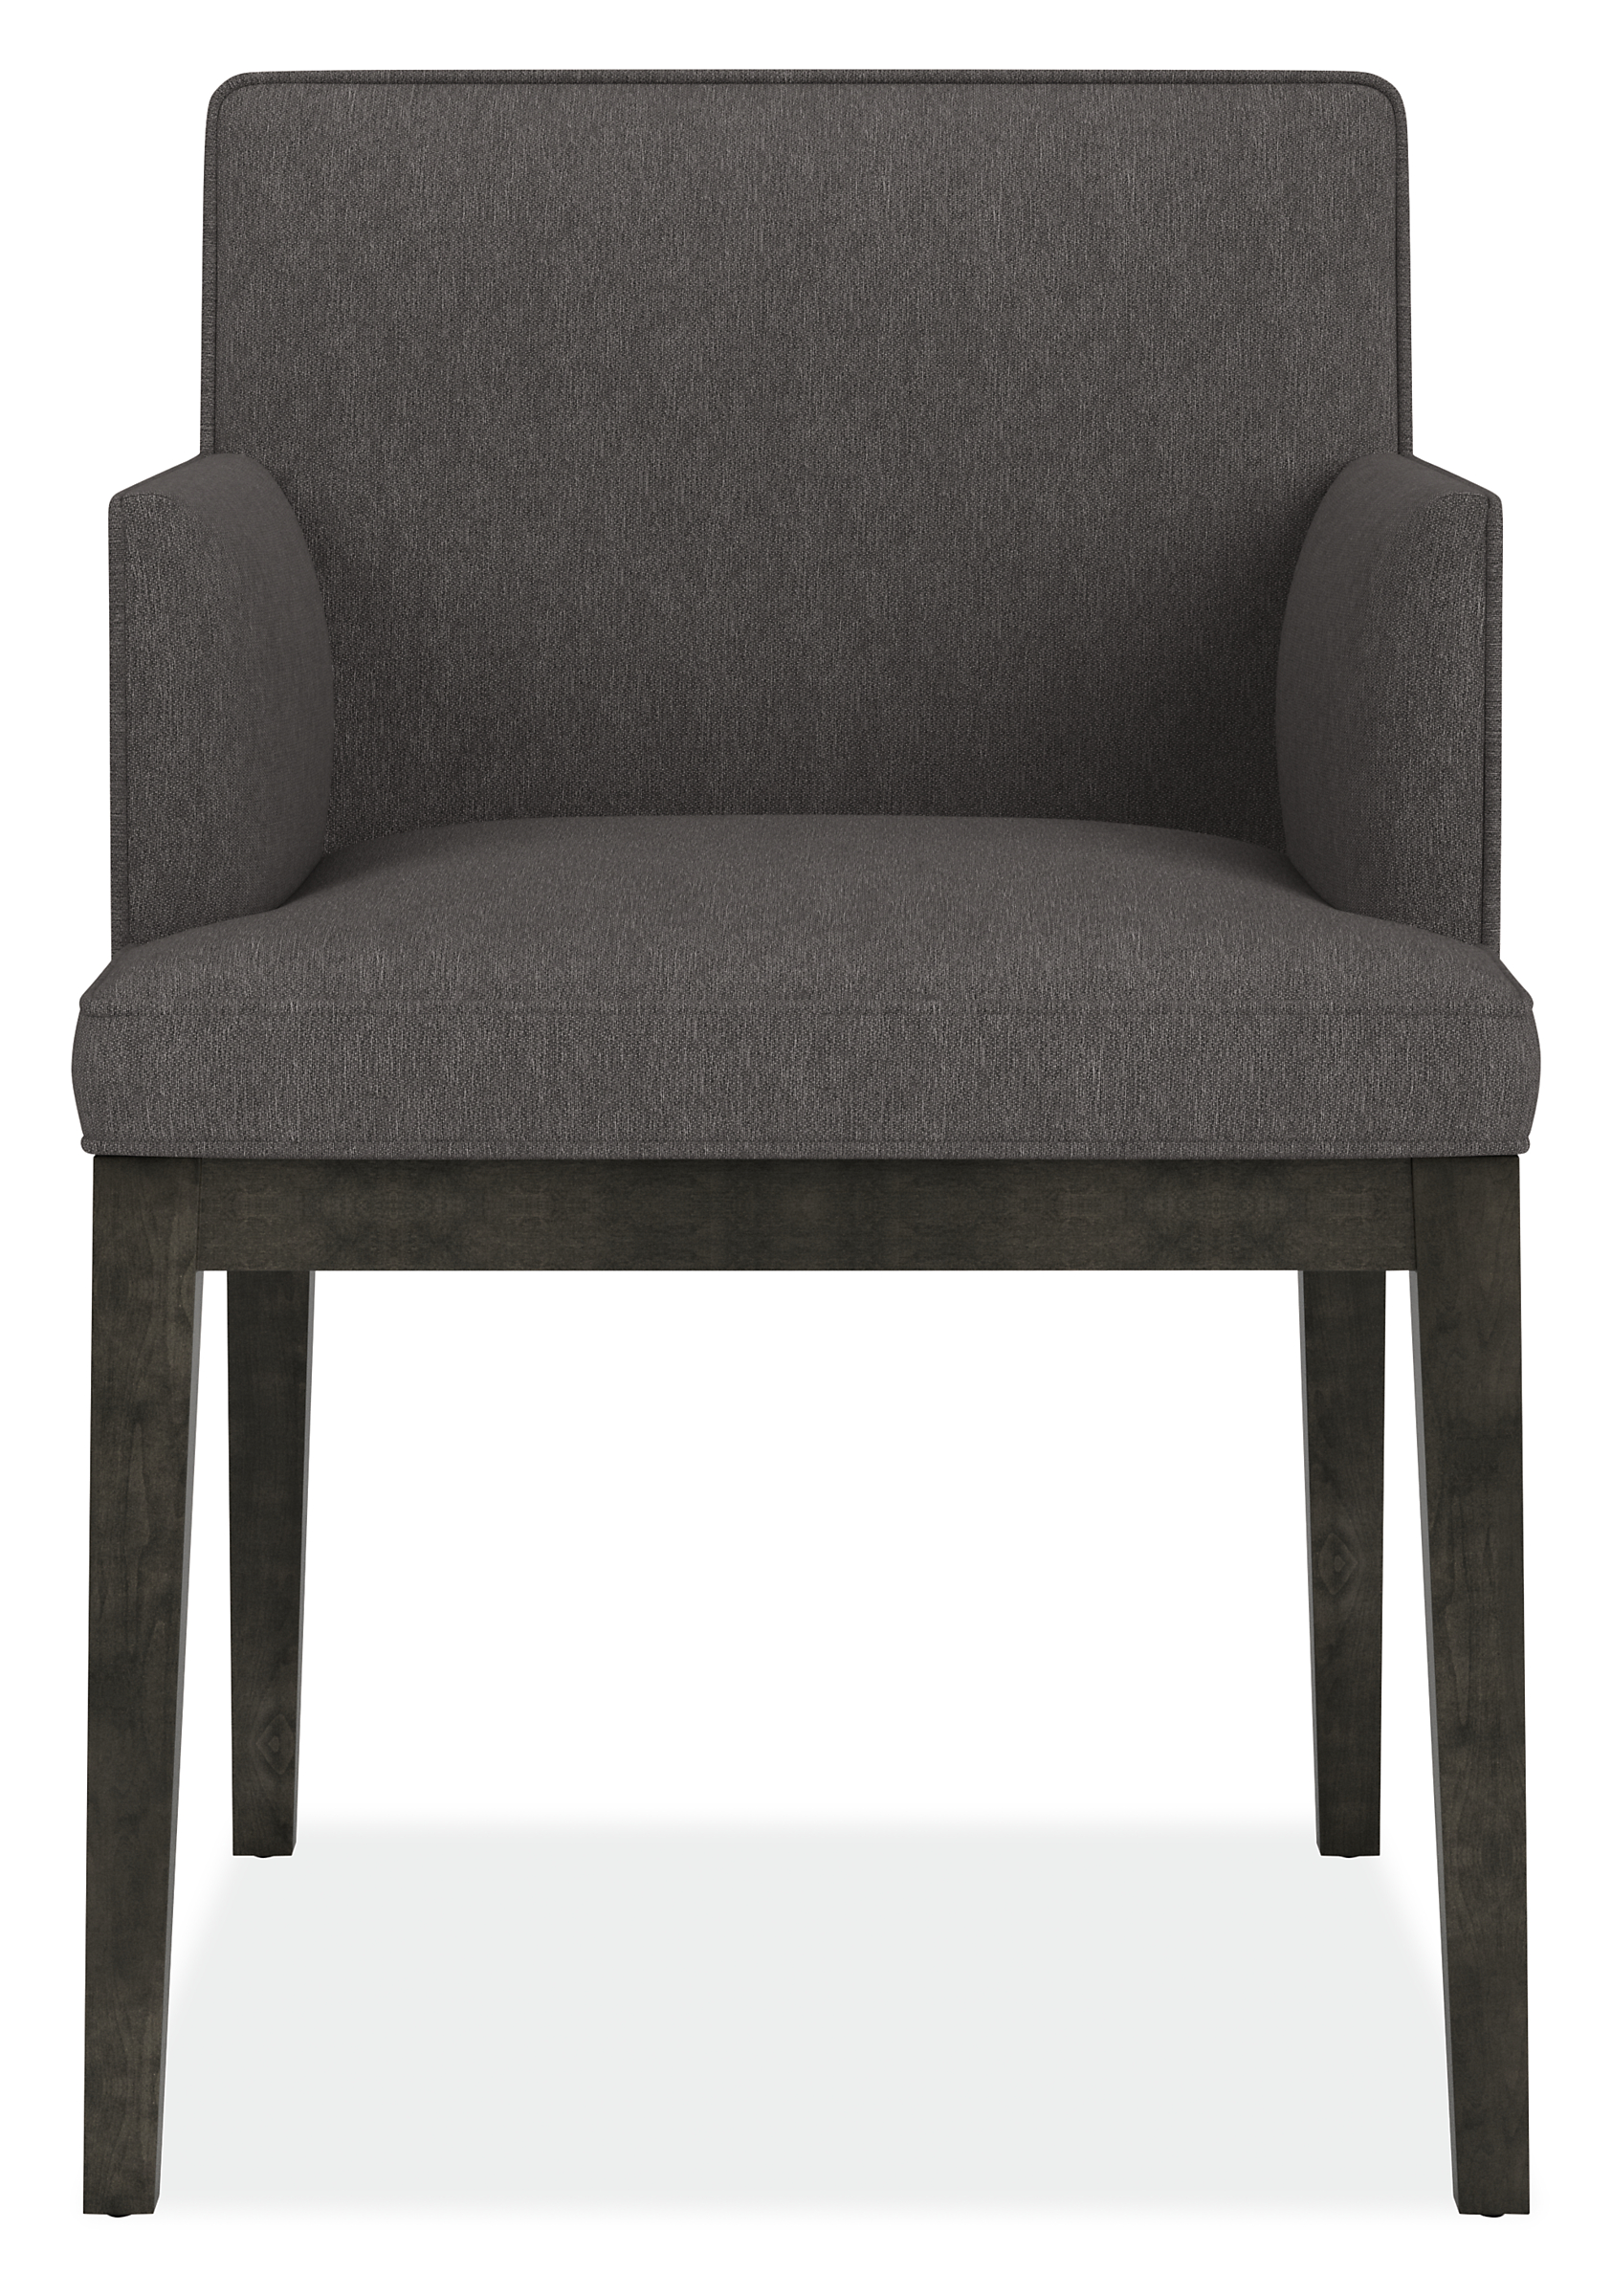 Front view of Ansel Arm Chair in Flint Fabric.